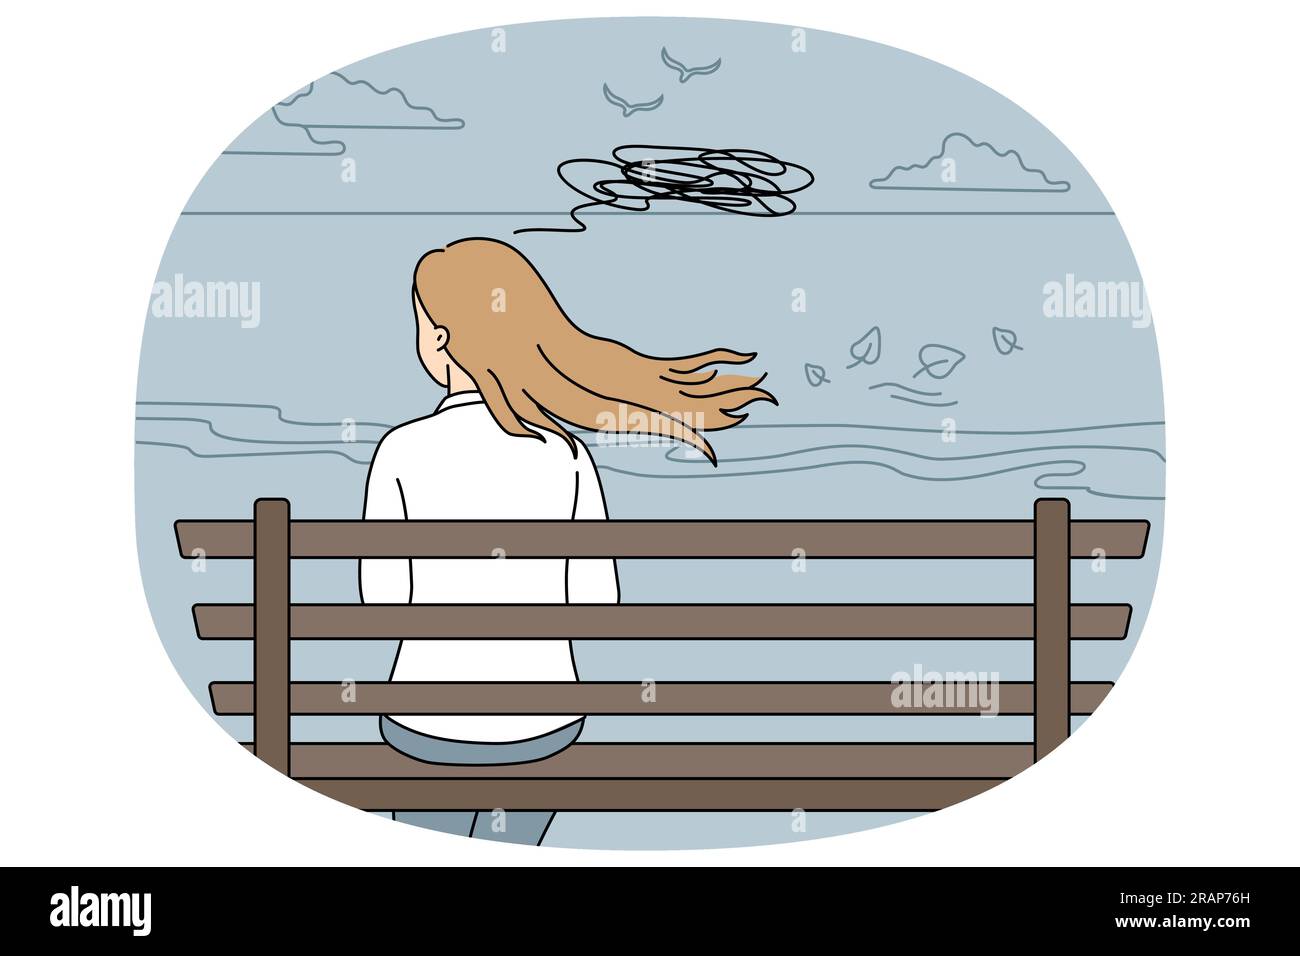 Woman sitting on bench thinking. Back view of female relax outdoors suffer from anxiety or depression overwhelmed with thoughts. Vector illustration. Stock Vector